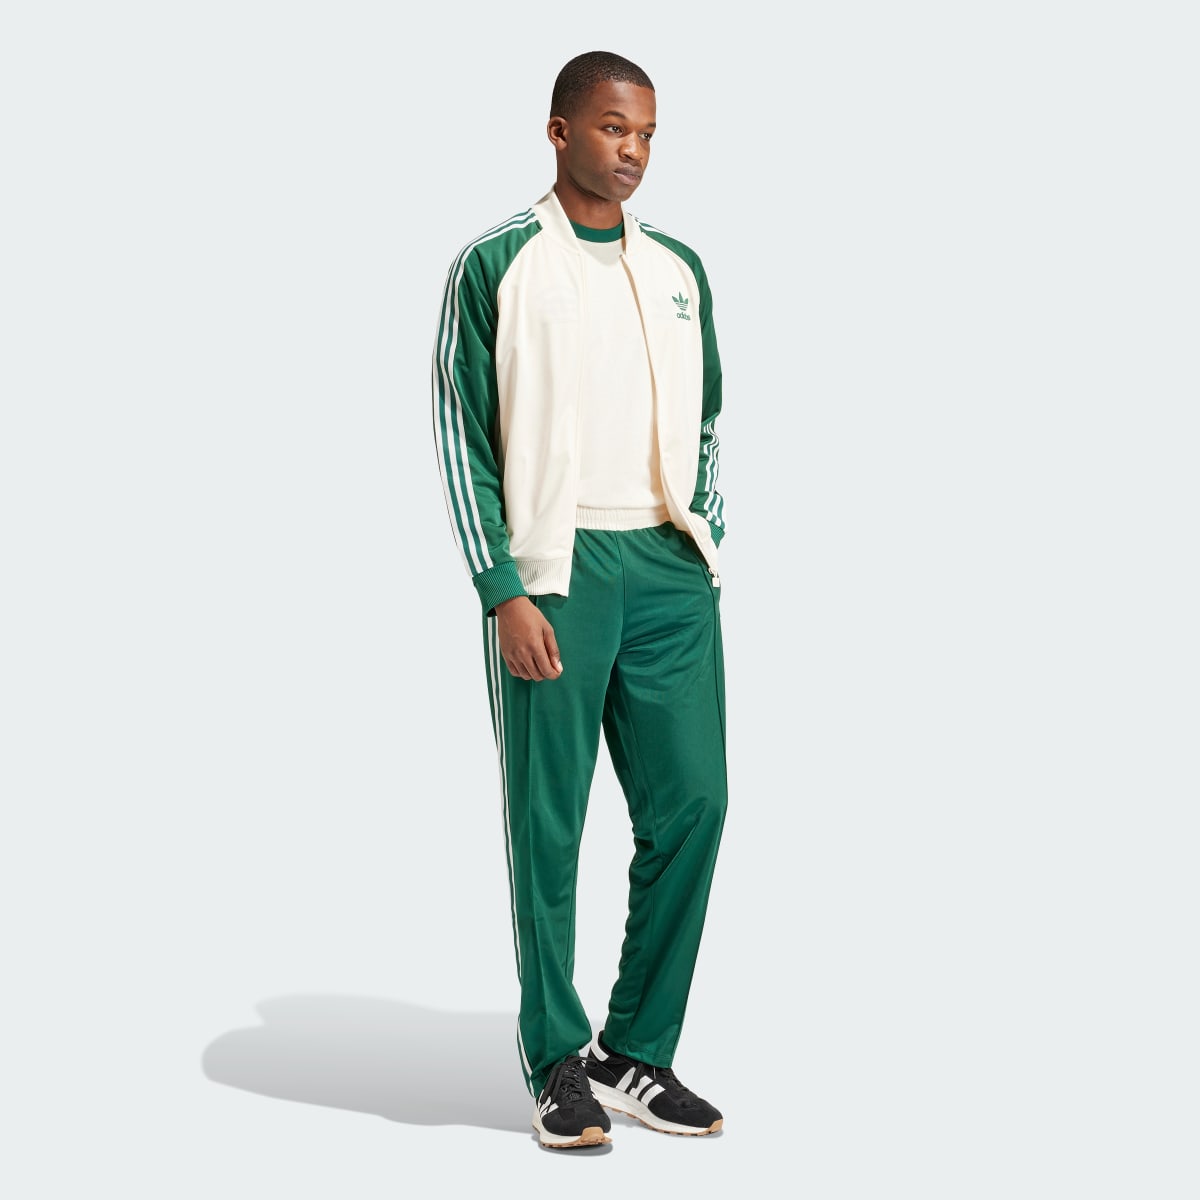 Adidas SST Track Top. 4